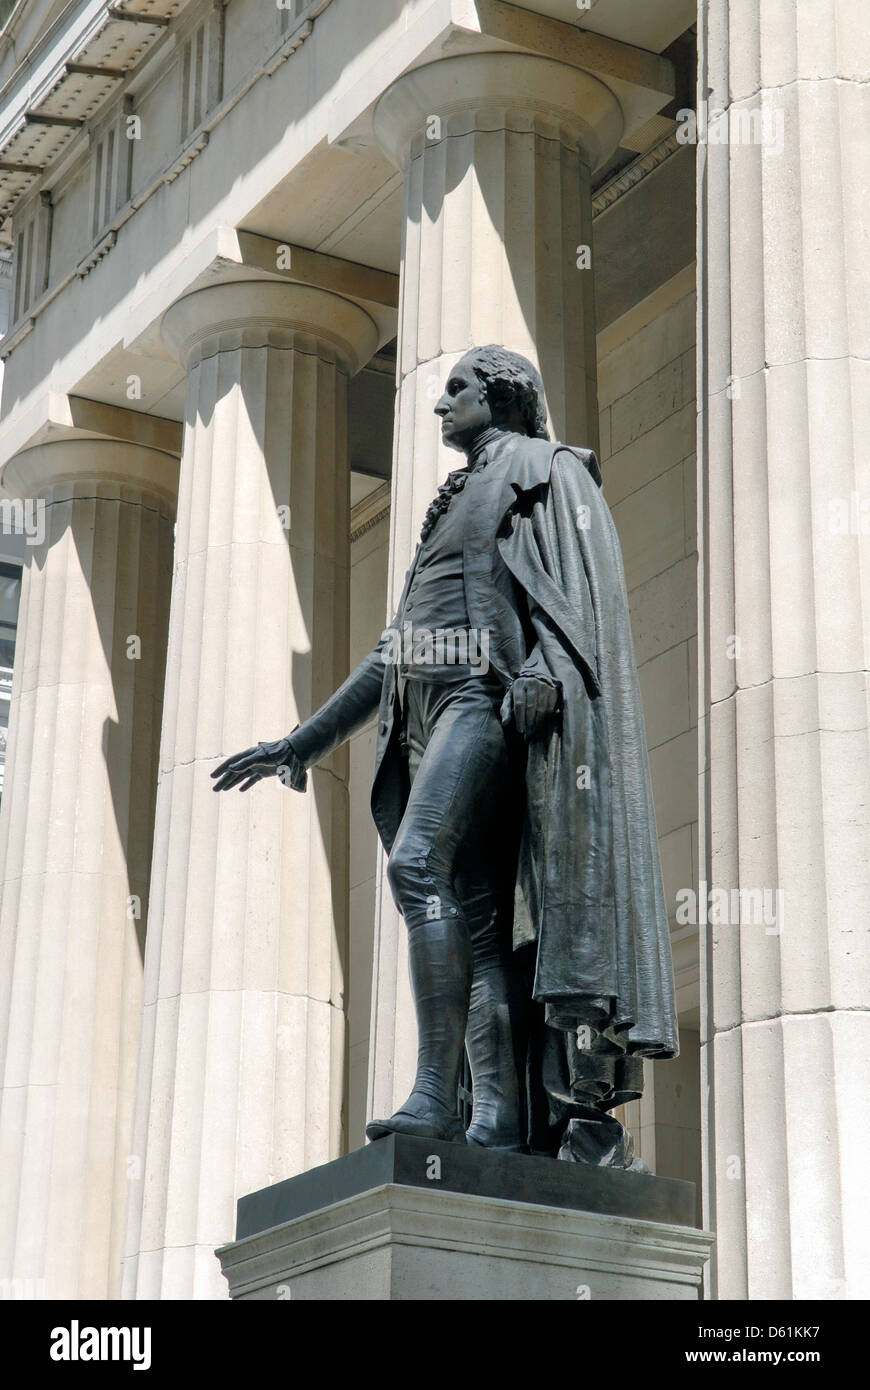 George-Washington-Memorial in front of the Federal Hall, Wall Street, New York City - Image taken from public ground Stock Photo